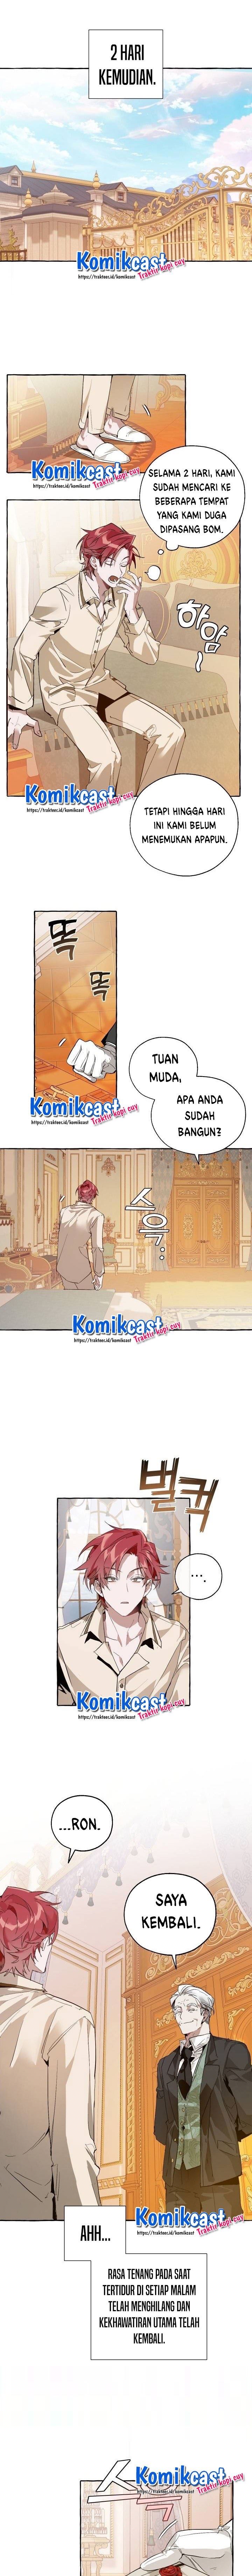 Lord Incheon Chapter 43 - 67